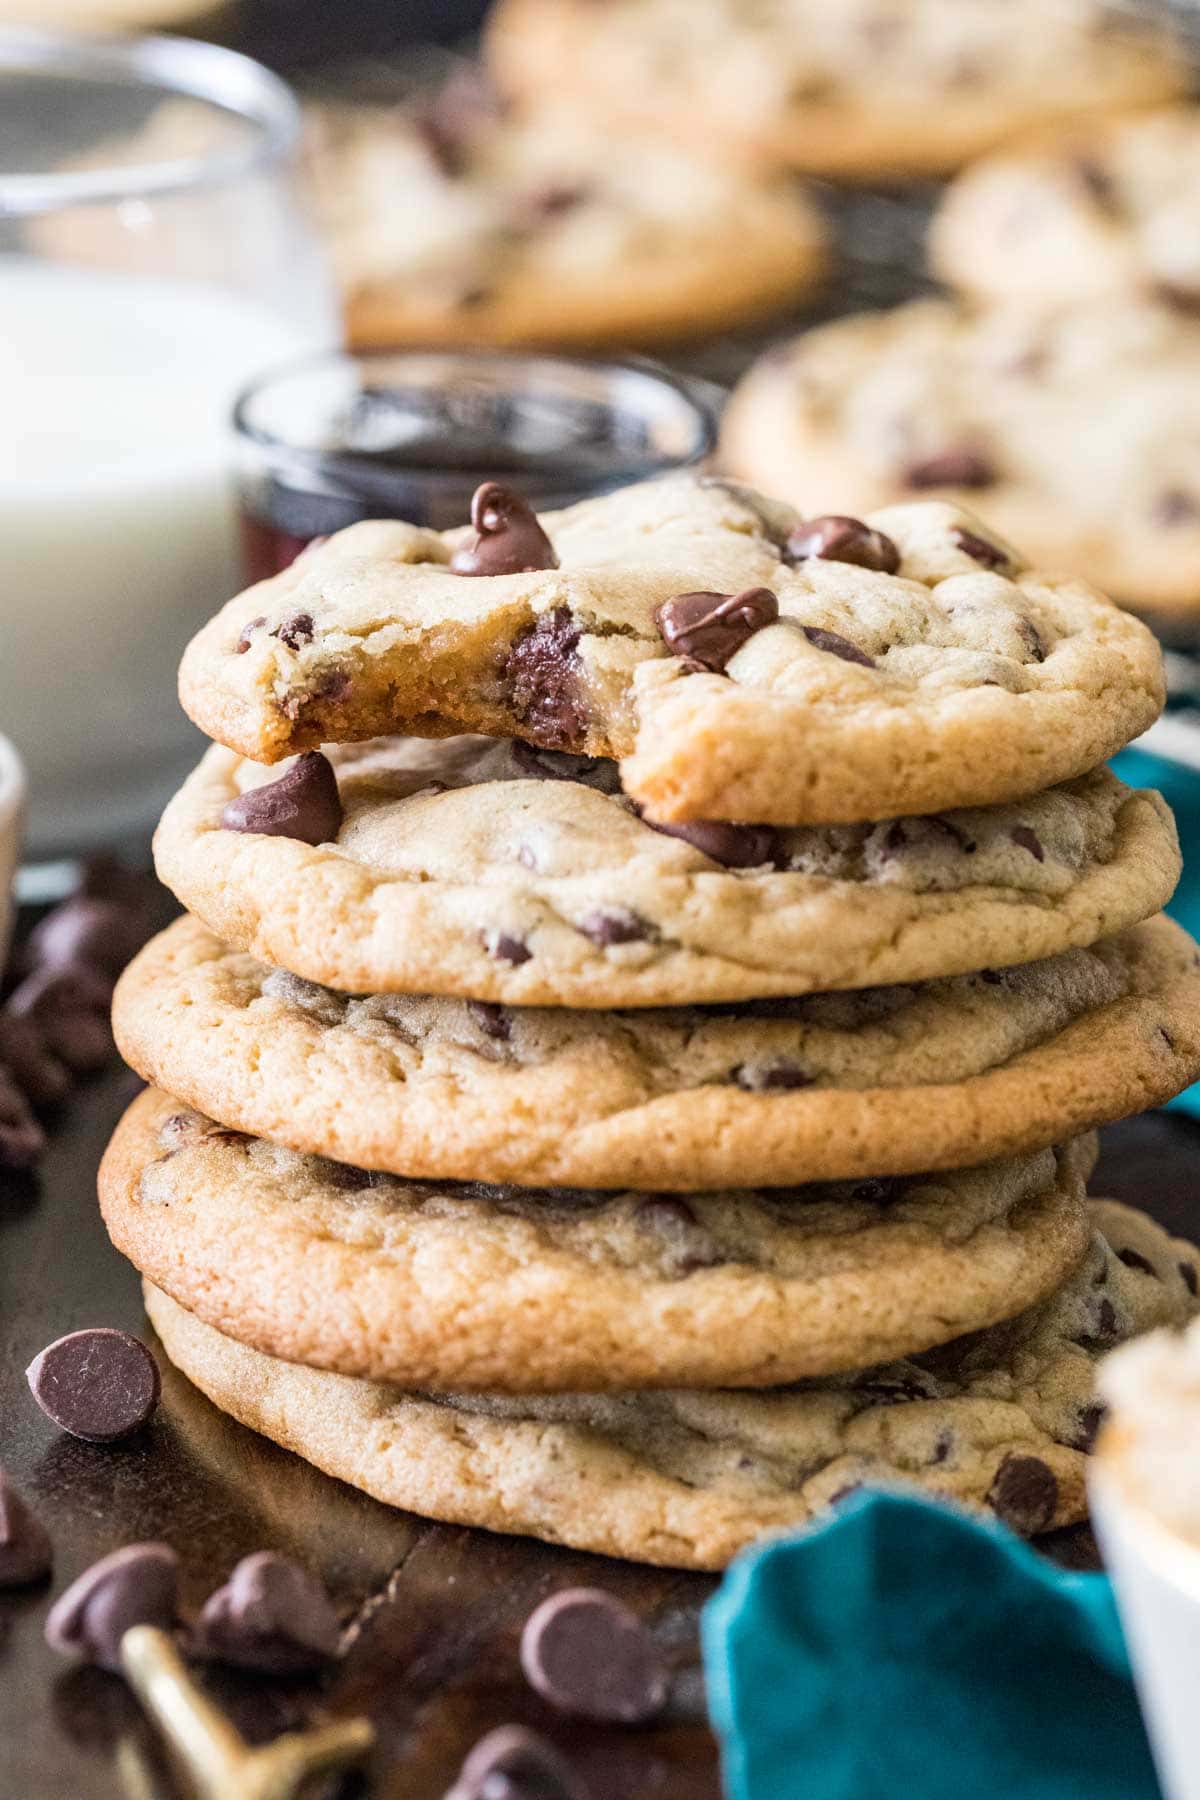 Stack of cookies made from this chocolate chip cookie recipe with melty chocolate chips and a bite missing from the top cookie